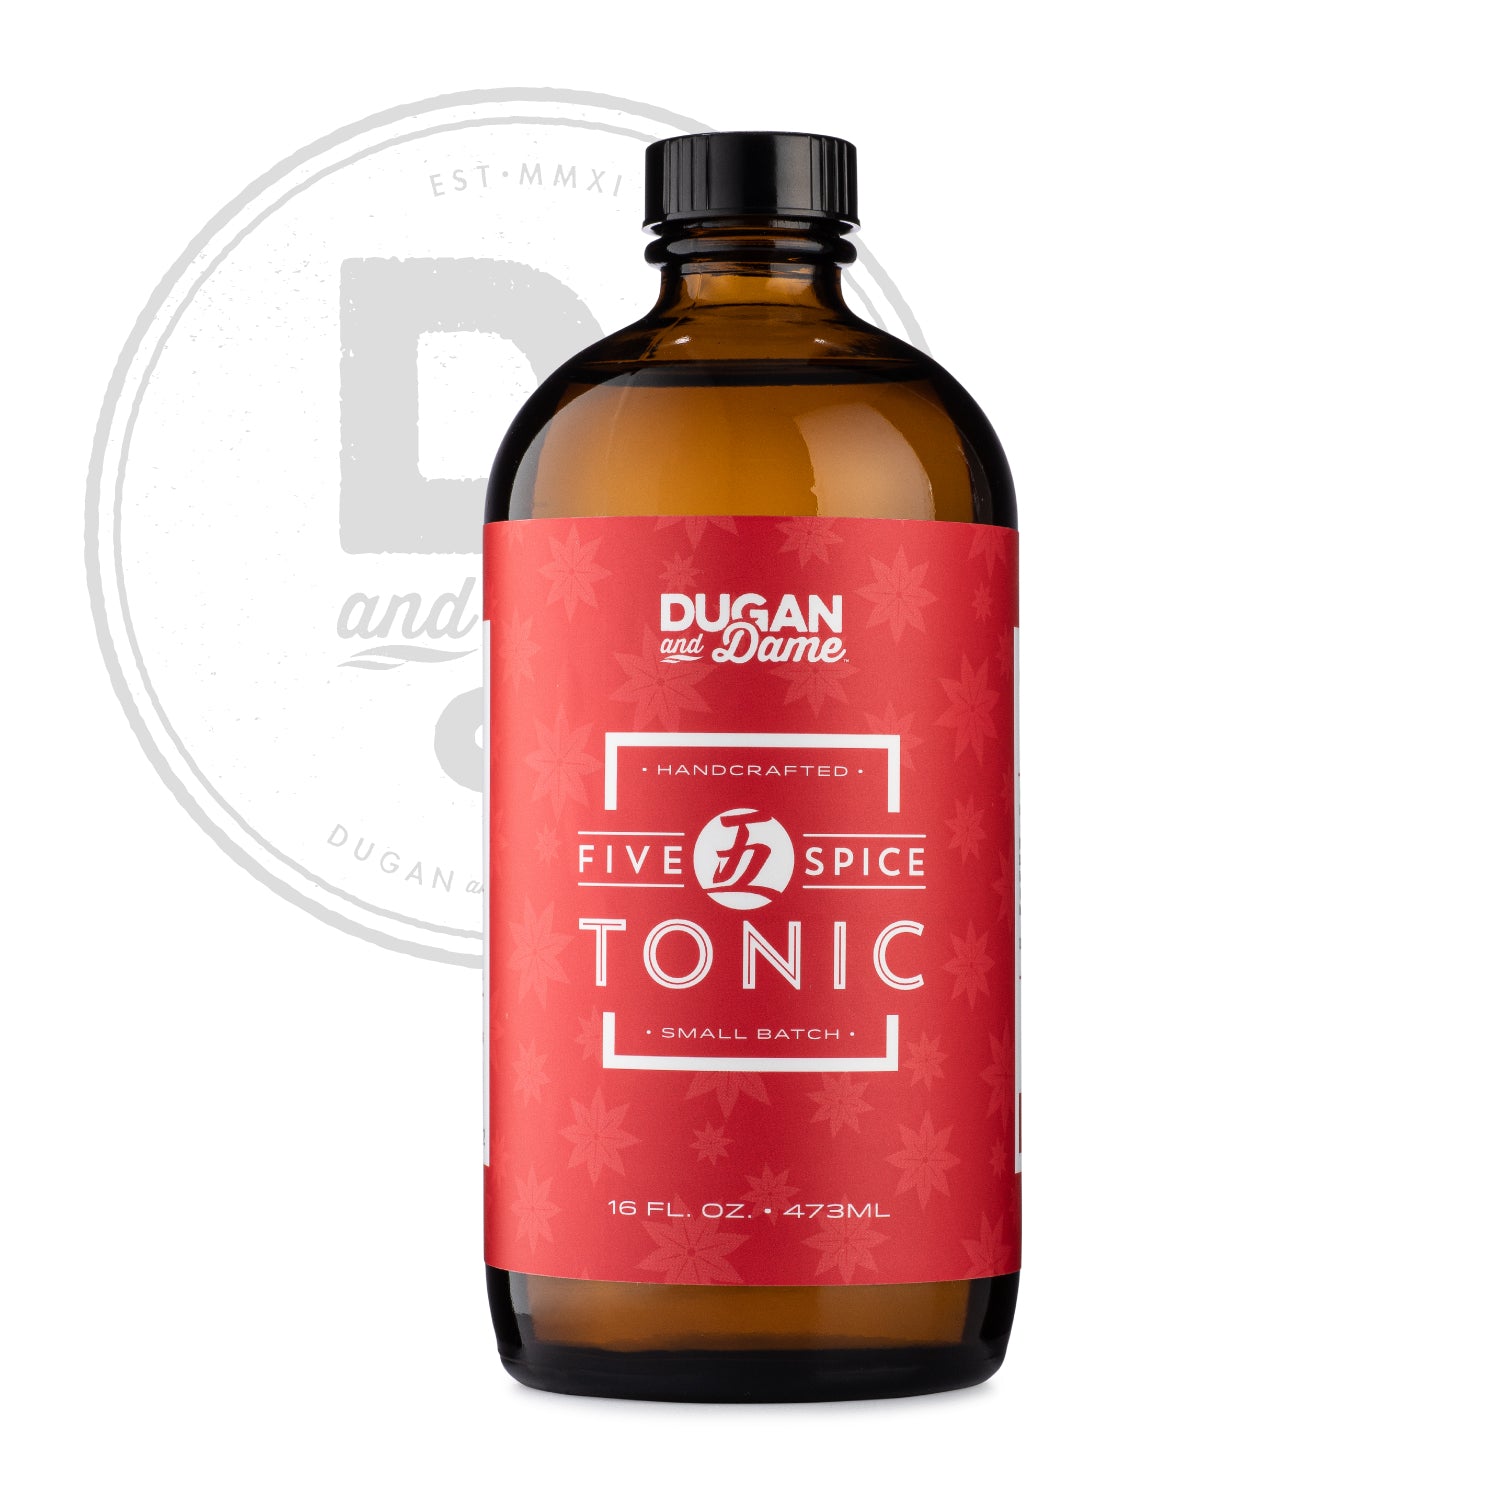 Dugan and Dame Five Spice Tonic